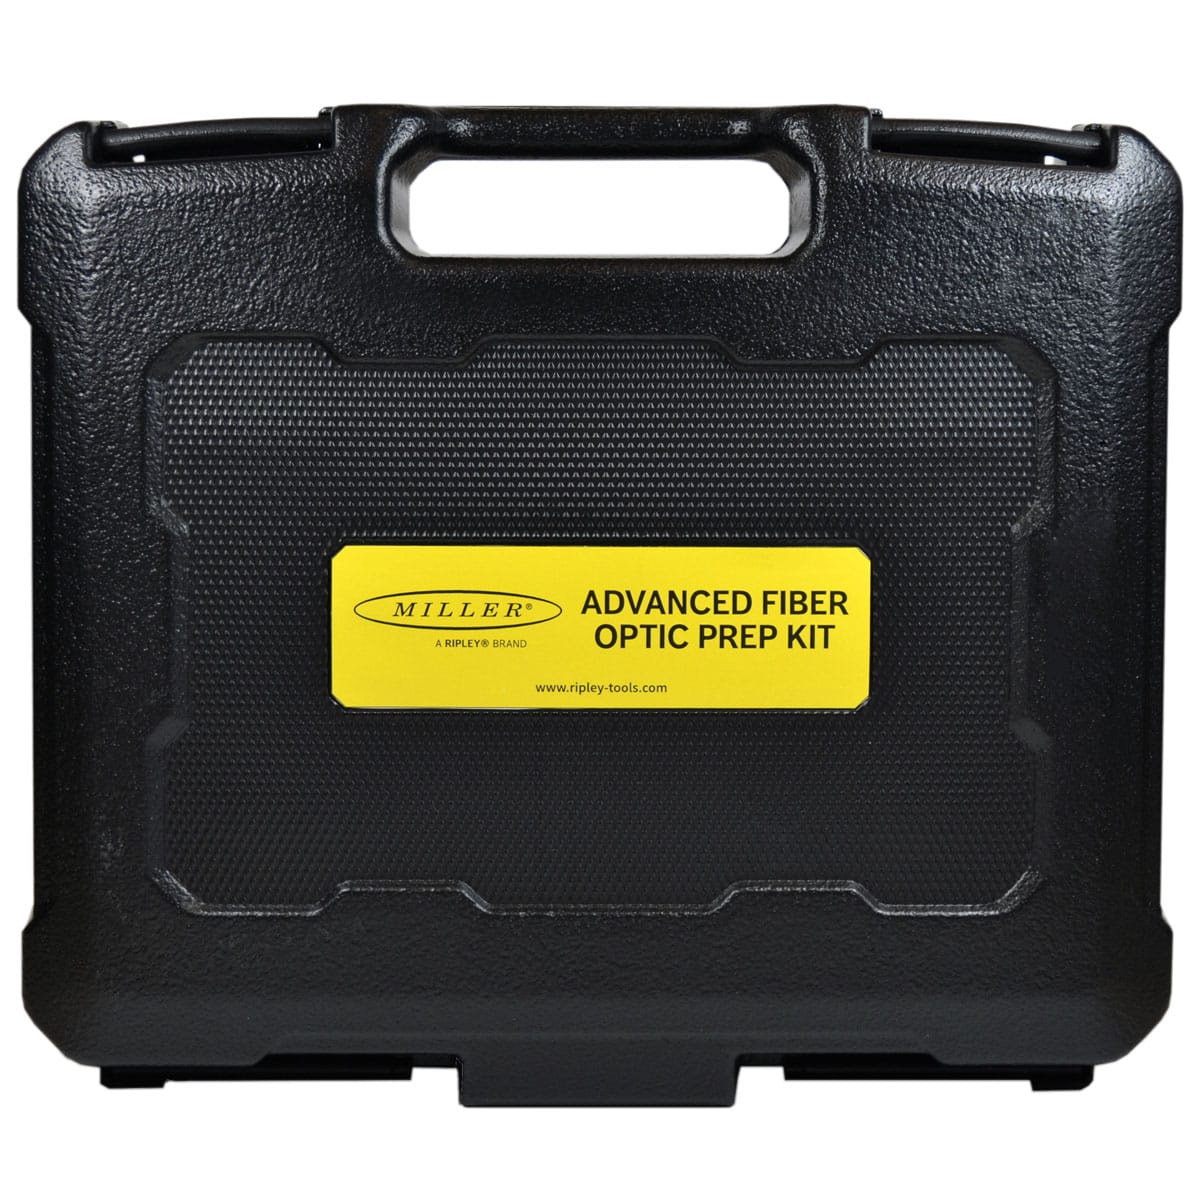 Advanced Fiber Kit Case w/ FO 103S and MB04-7020 image 3